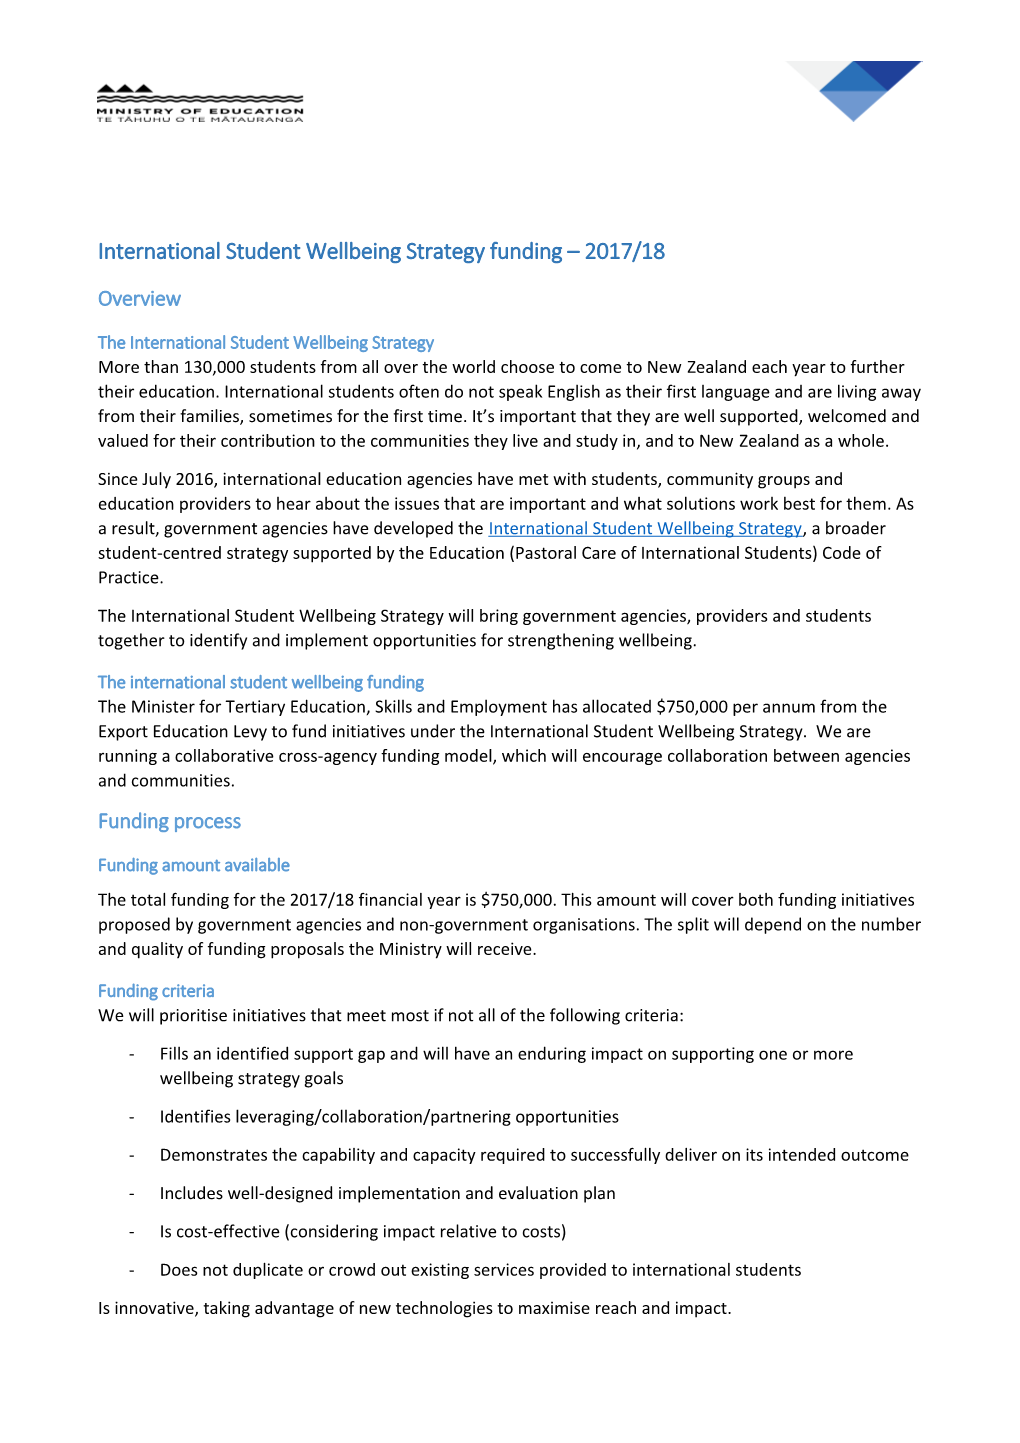 International Student Wellbeing Strategy Funding 2017/18